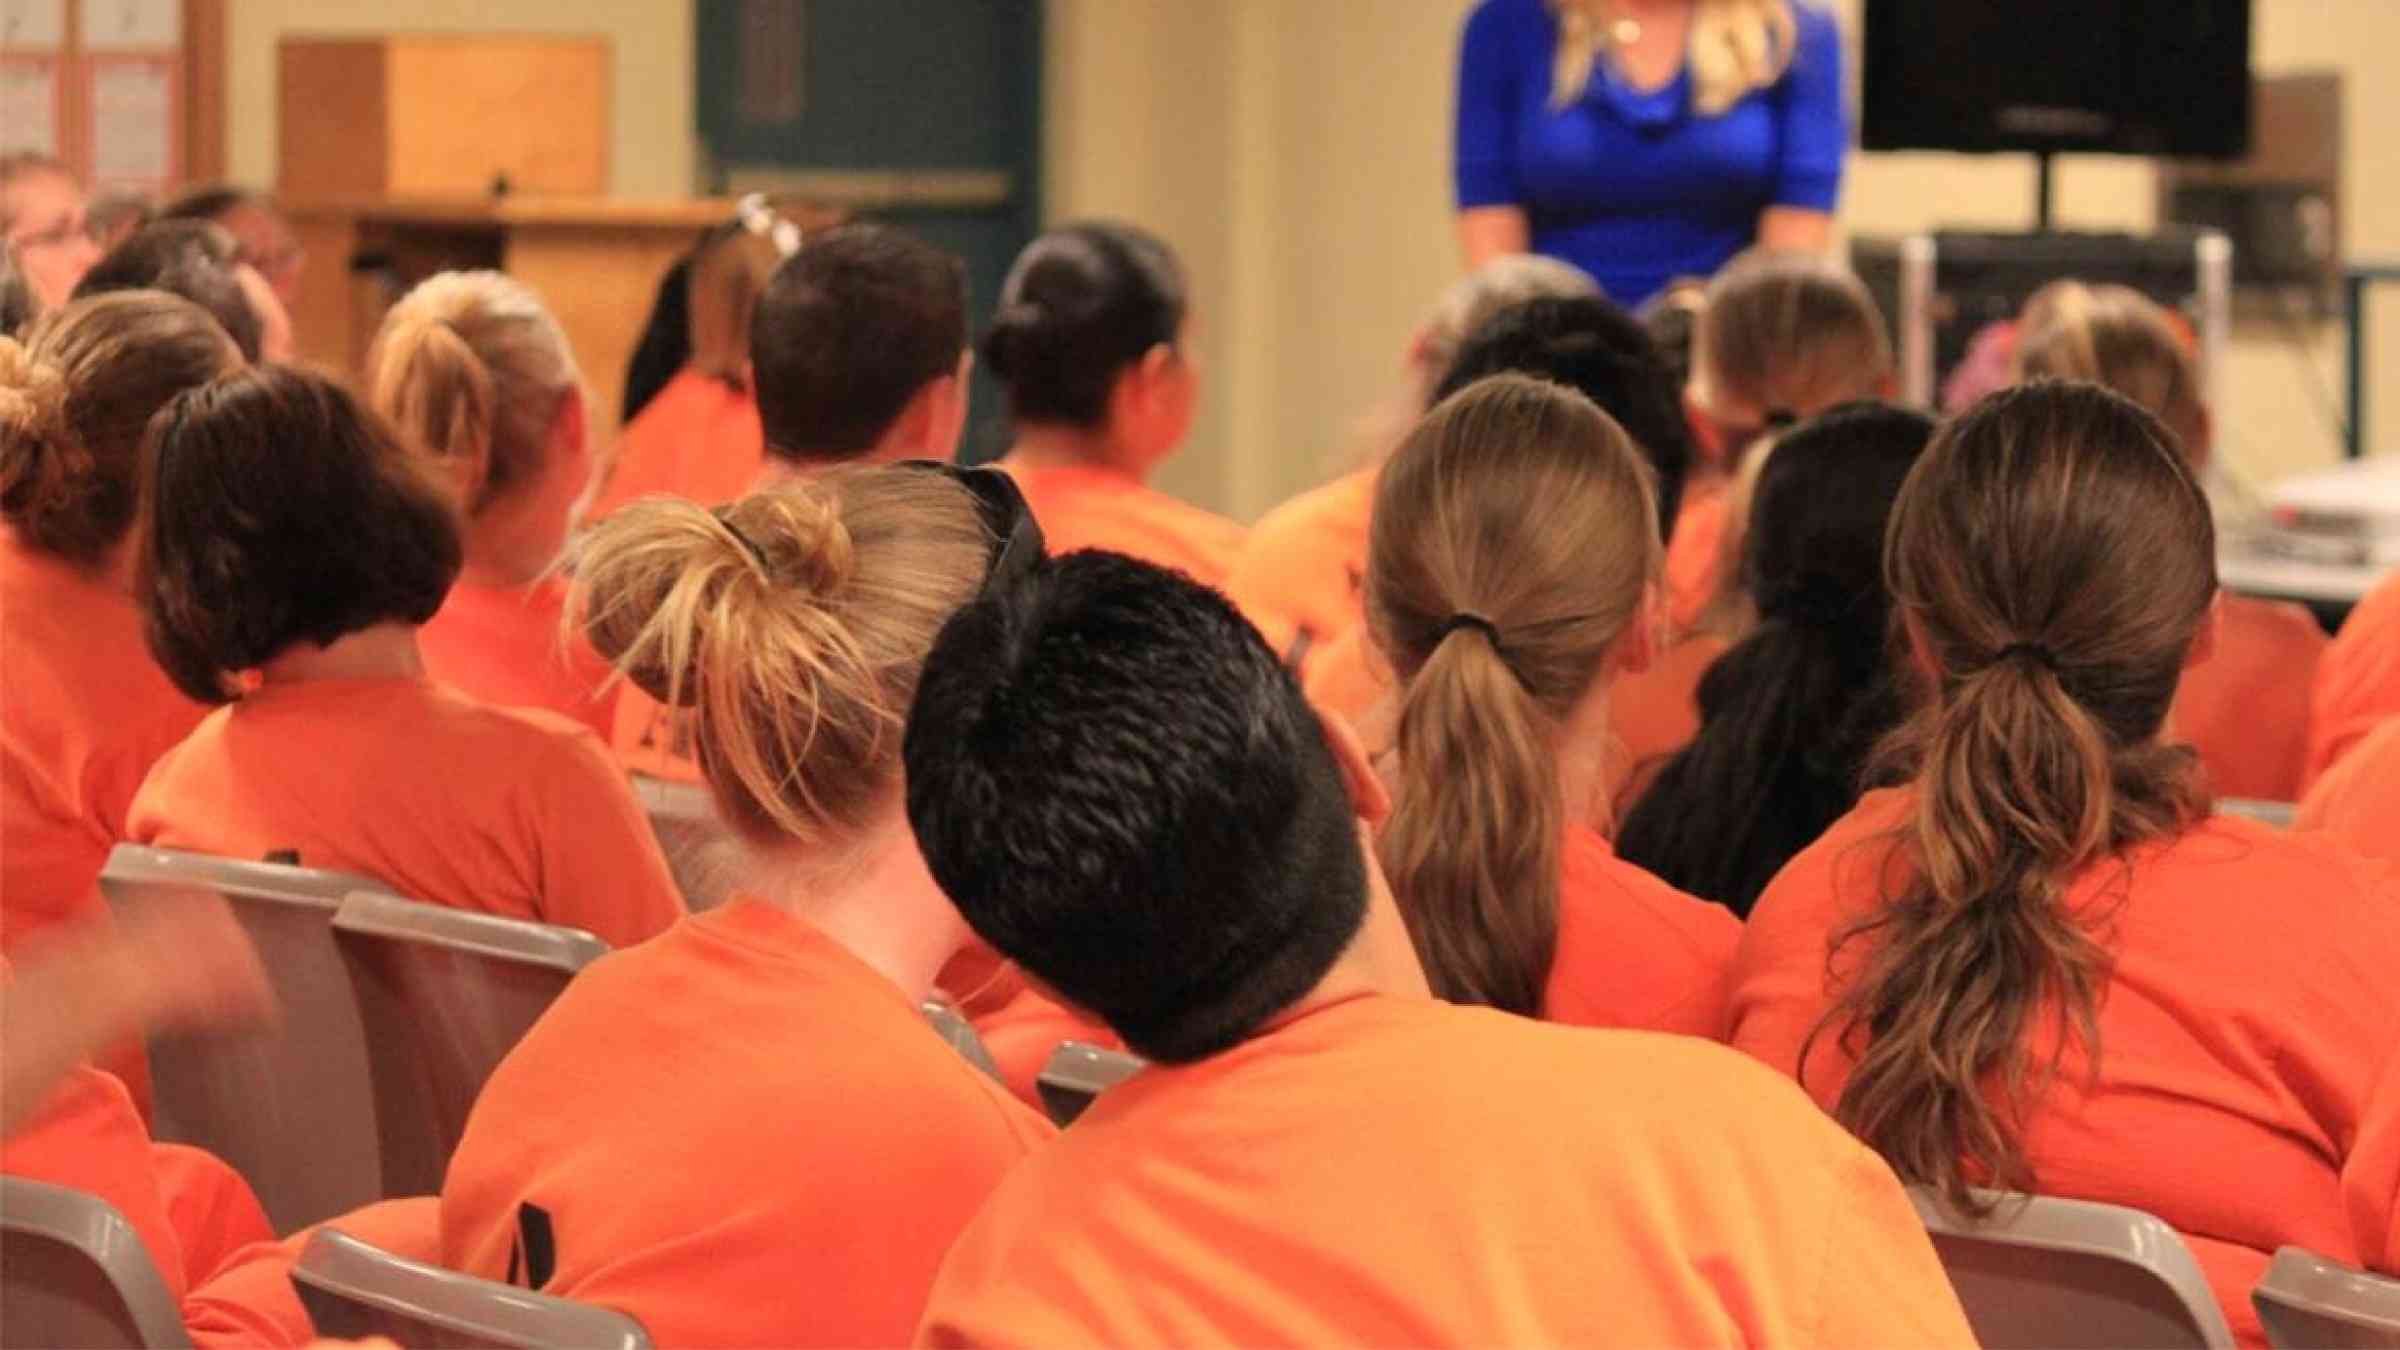 Inmates gather for a program in Perryville State Prison, Arizona